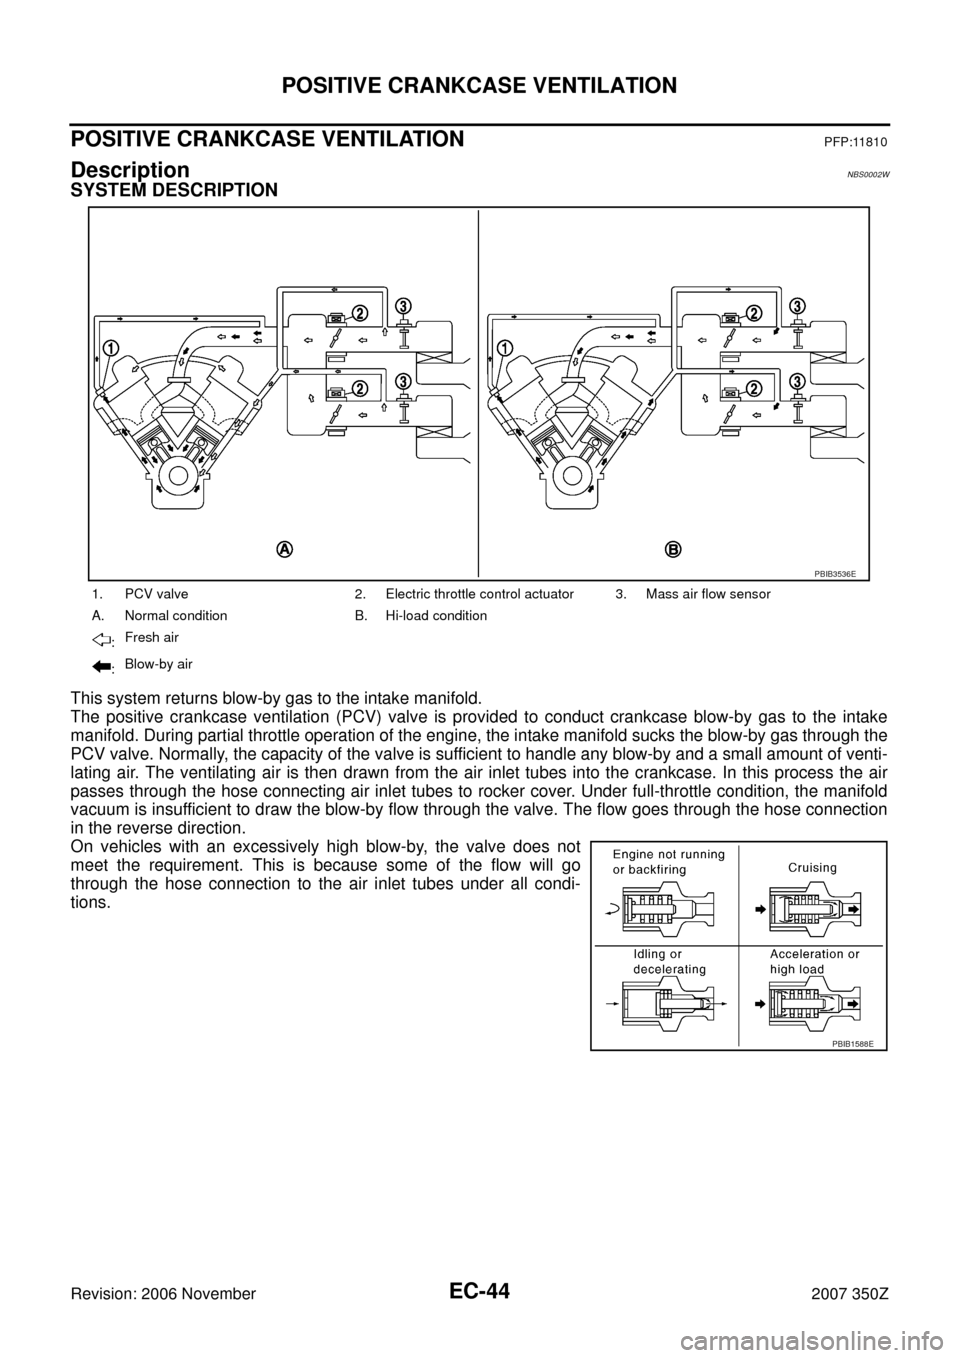 NISSAN 350Z 2007 Z33 Engine Control User Guide EC-44
POSITIVE CRANKCASE VENTILATION
Revision: 2006 November2007 350Z
POSITIVE CRANKCASE VENTILATIONPFP:11810
DescriptionNBS0002W
SYSTEM DESCRIPTION
This system returns blow-by gas to the intake manif